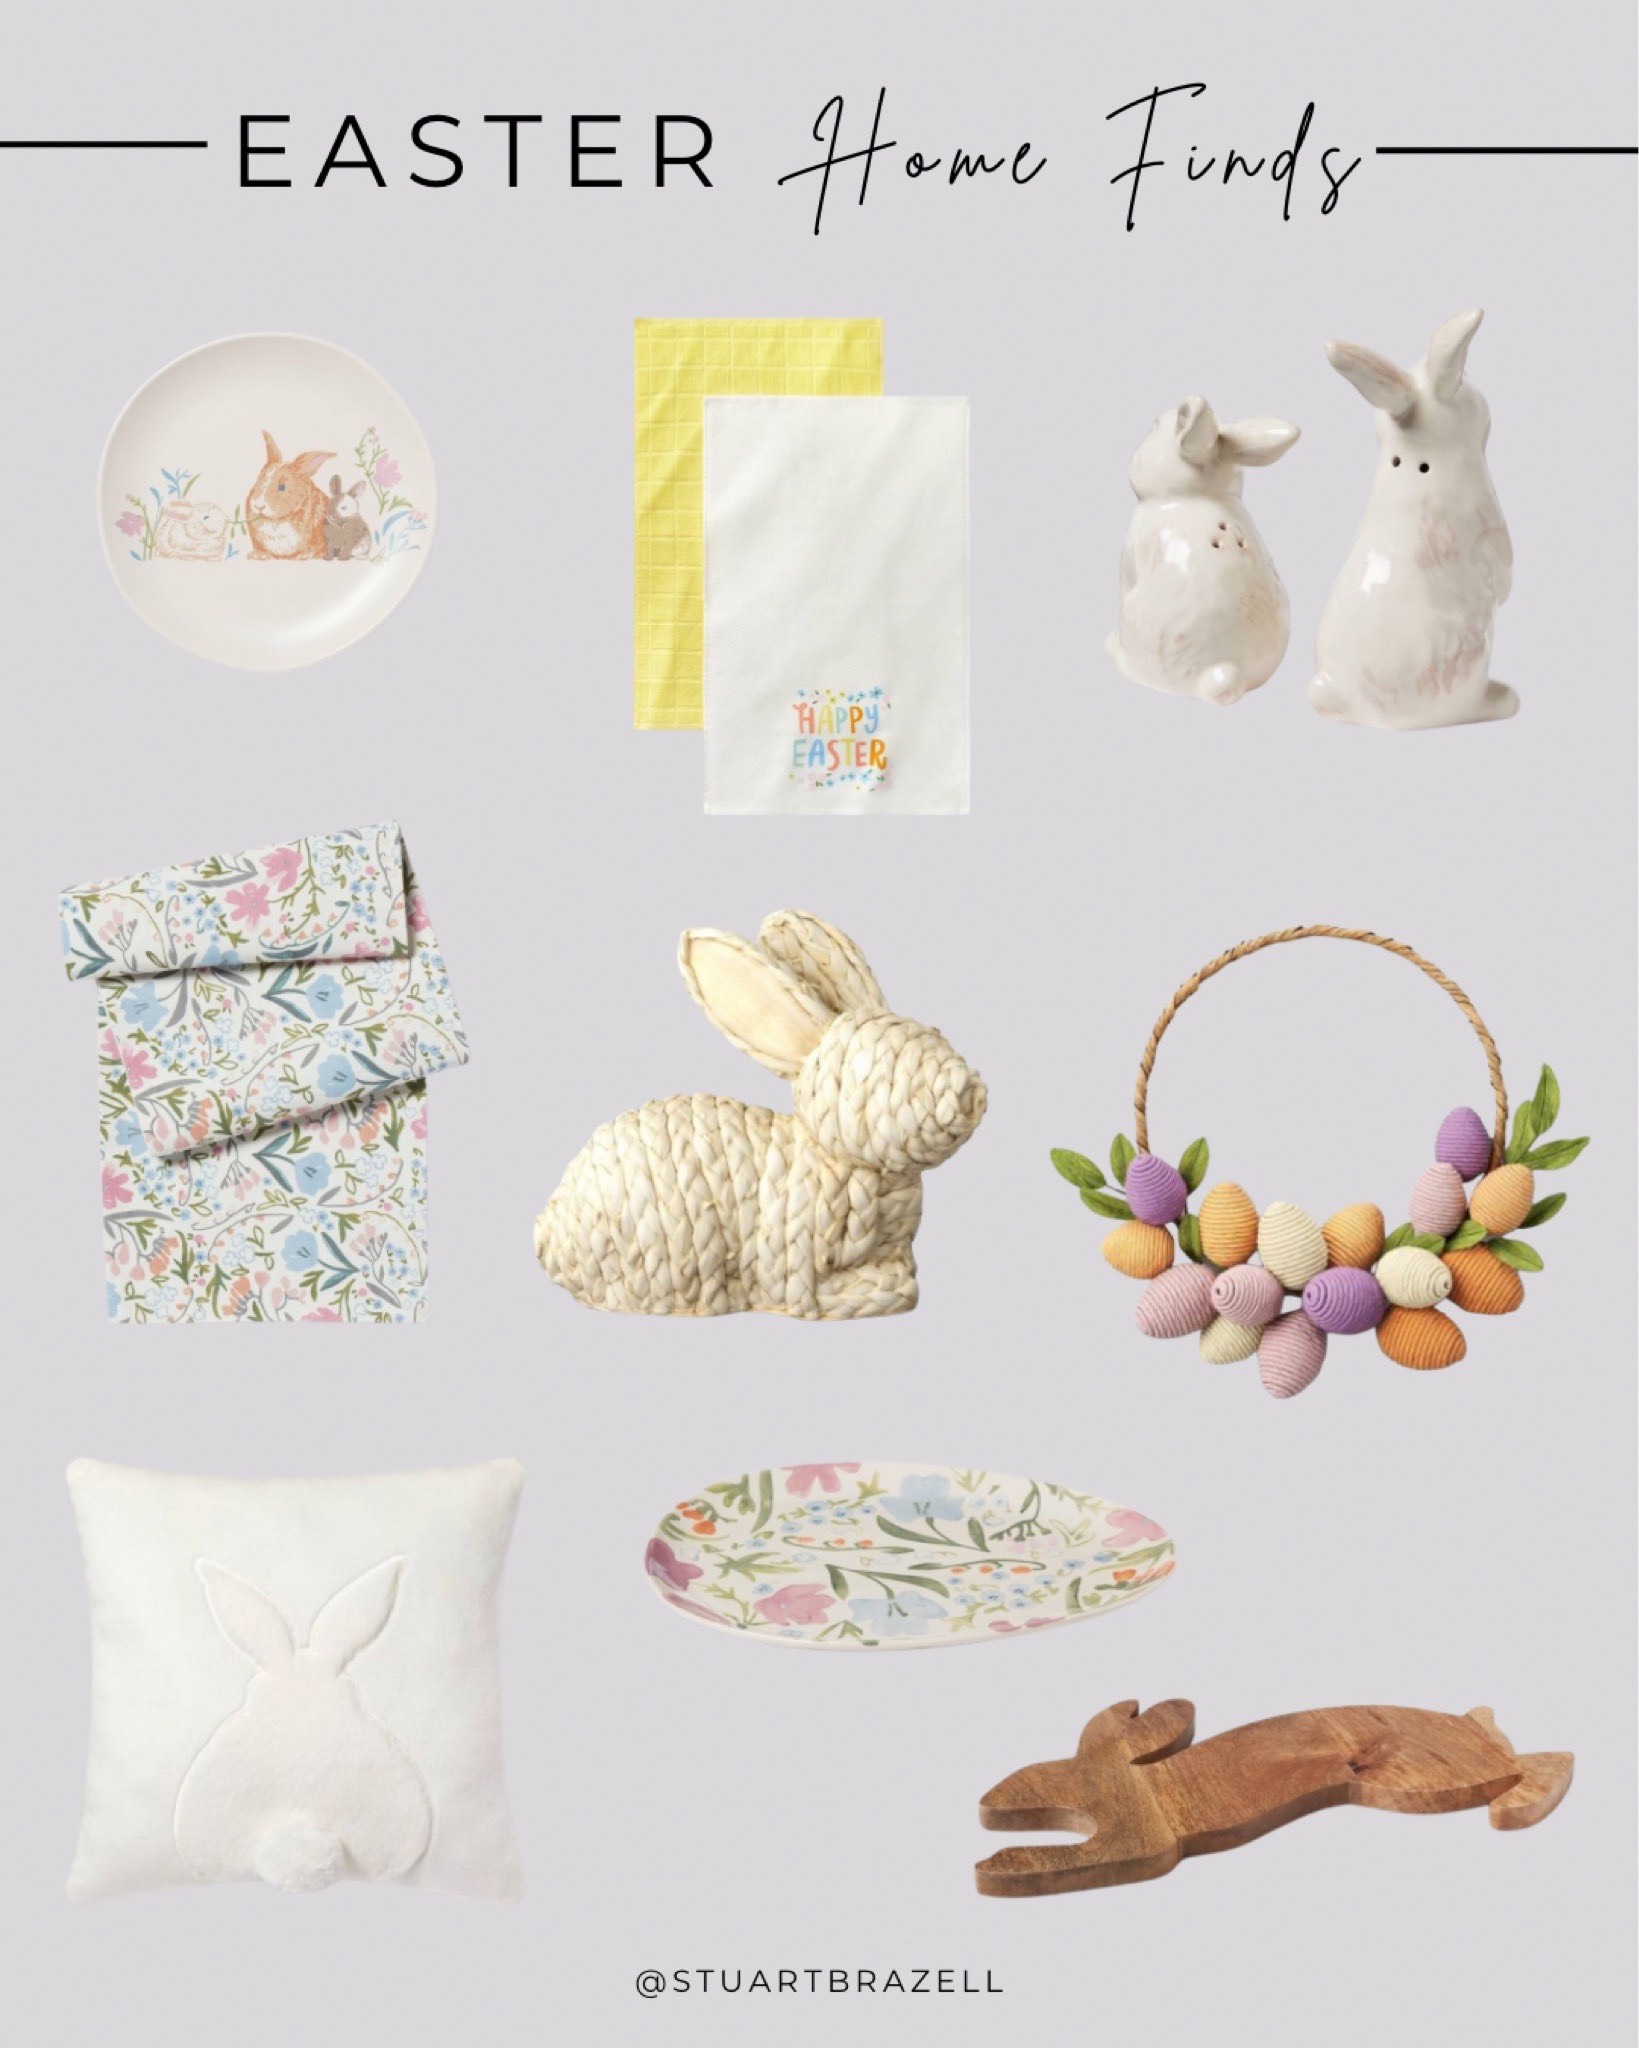 Inexpensive Easter Spring Decor Finds from Target